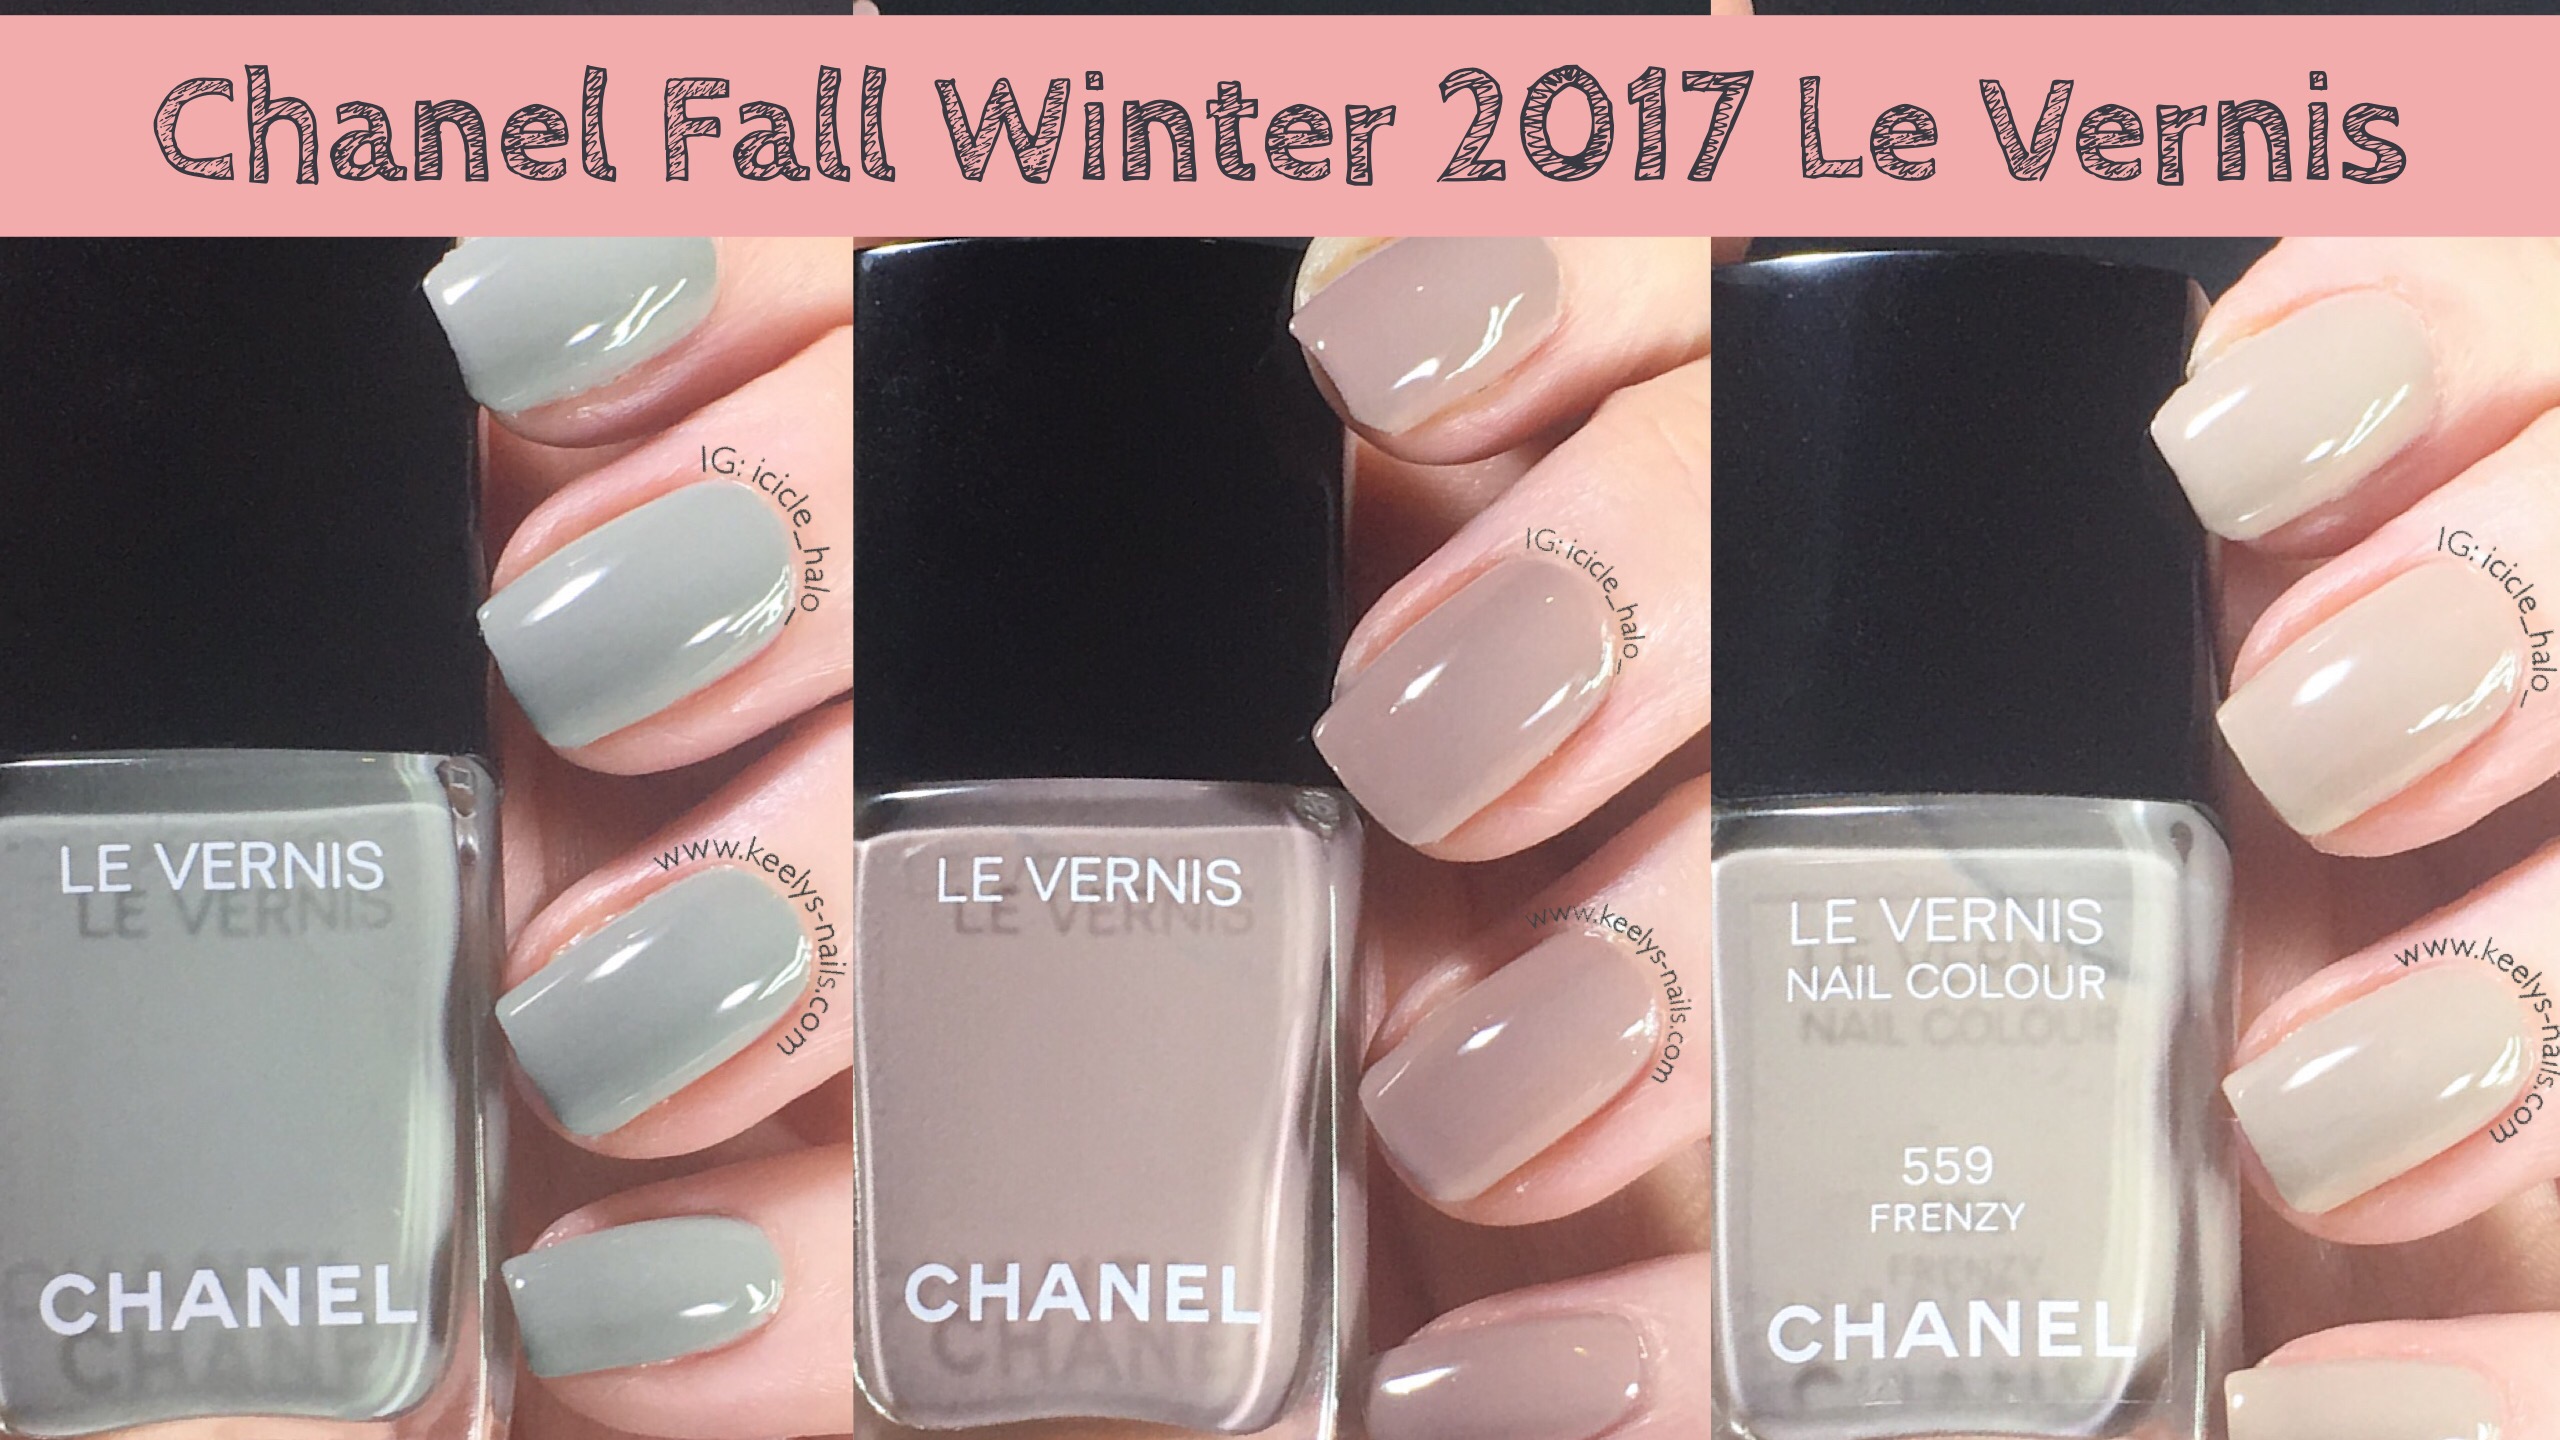 Chanel Fall Winter 2017 swatches - Keely's